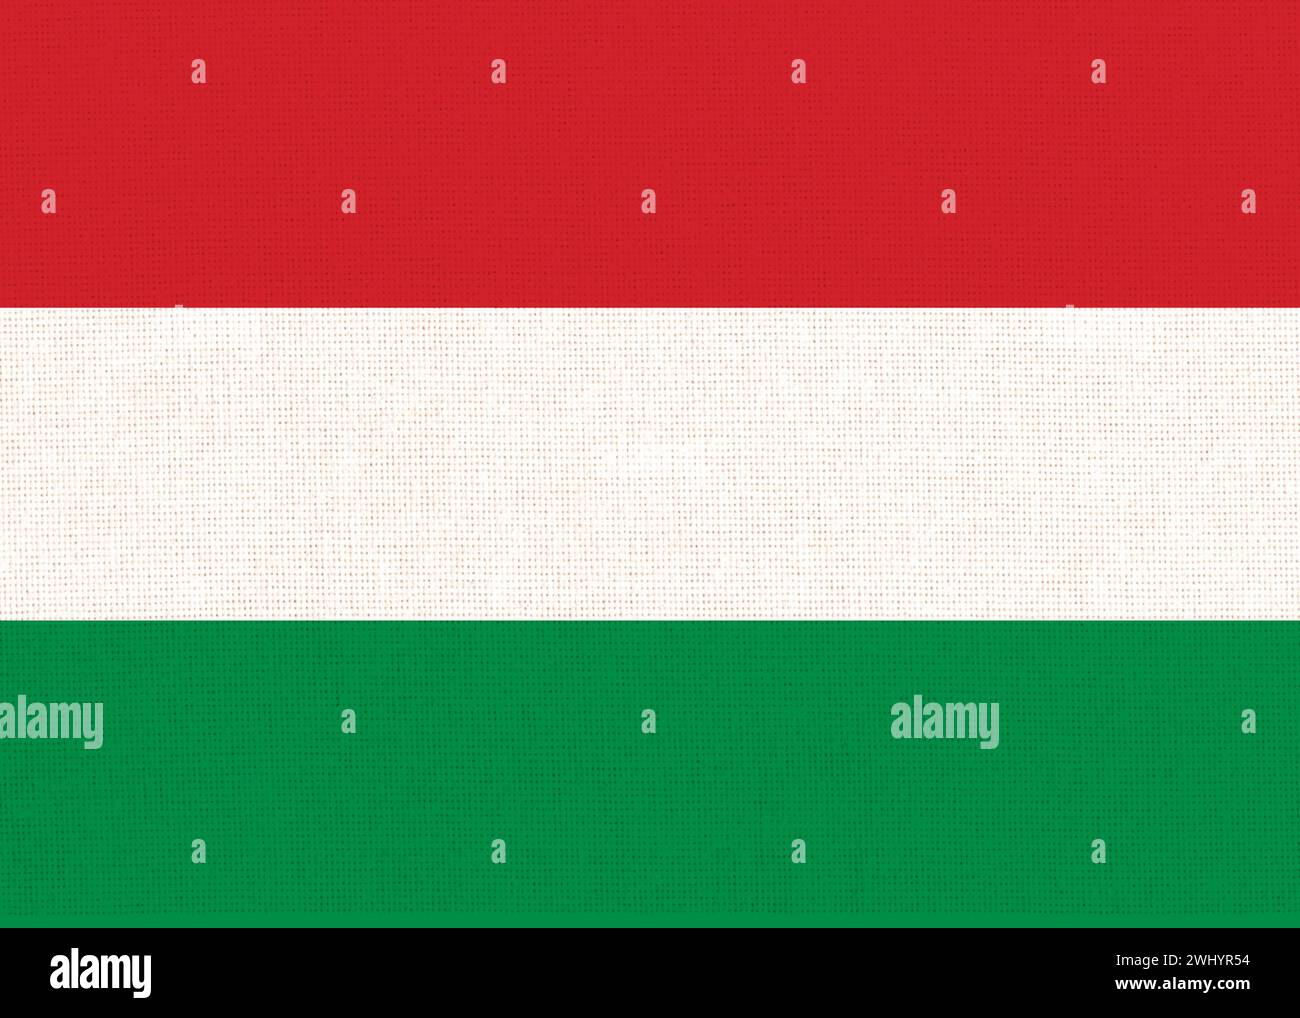 Flag of Hungary. Hungarian flag on fabric surface. Hungarian national flag on textured background. F Stock Photo